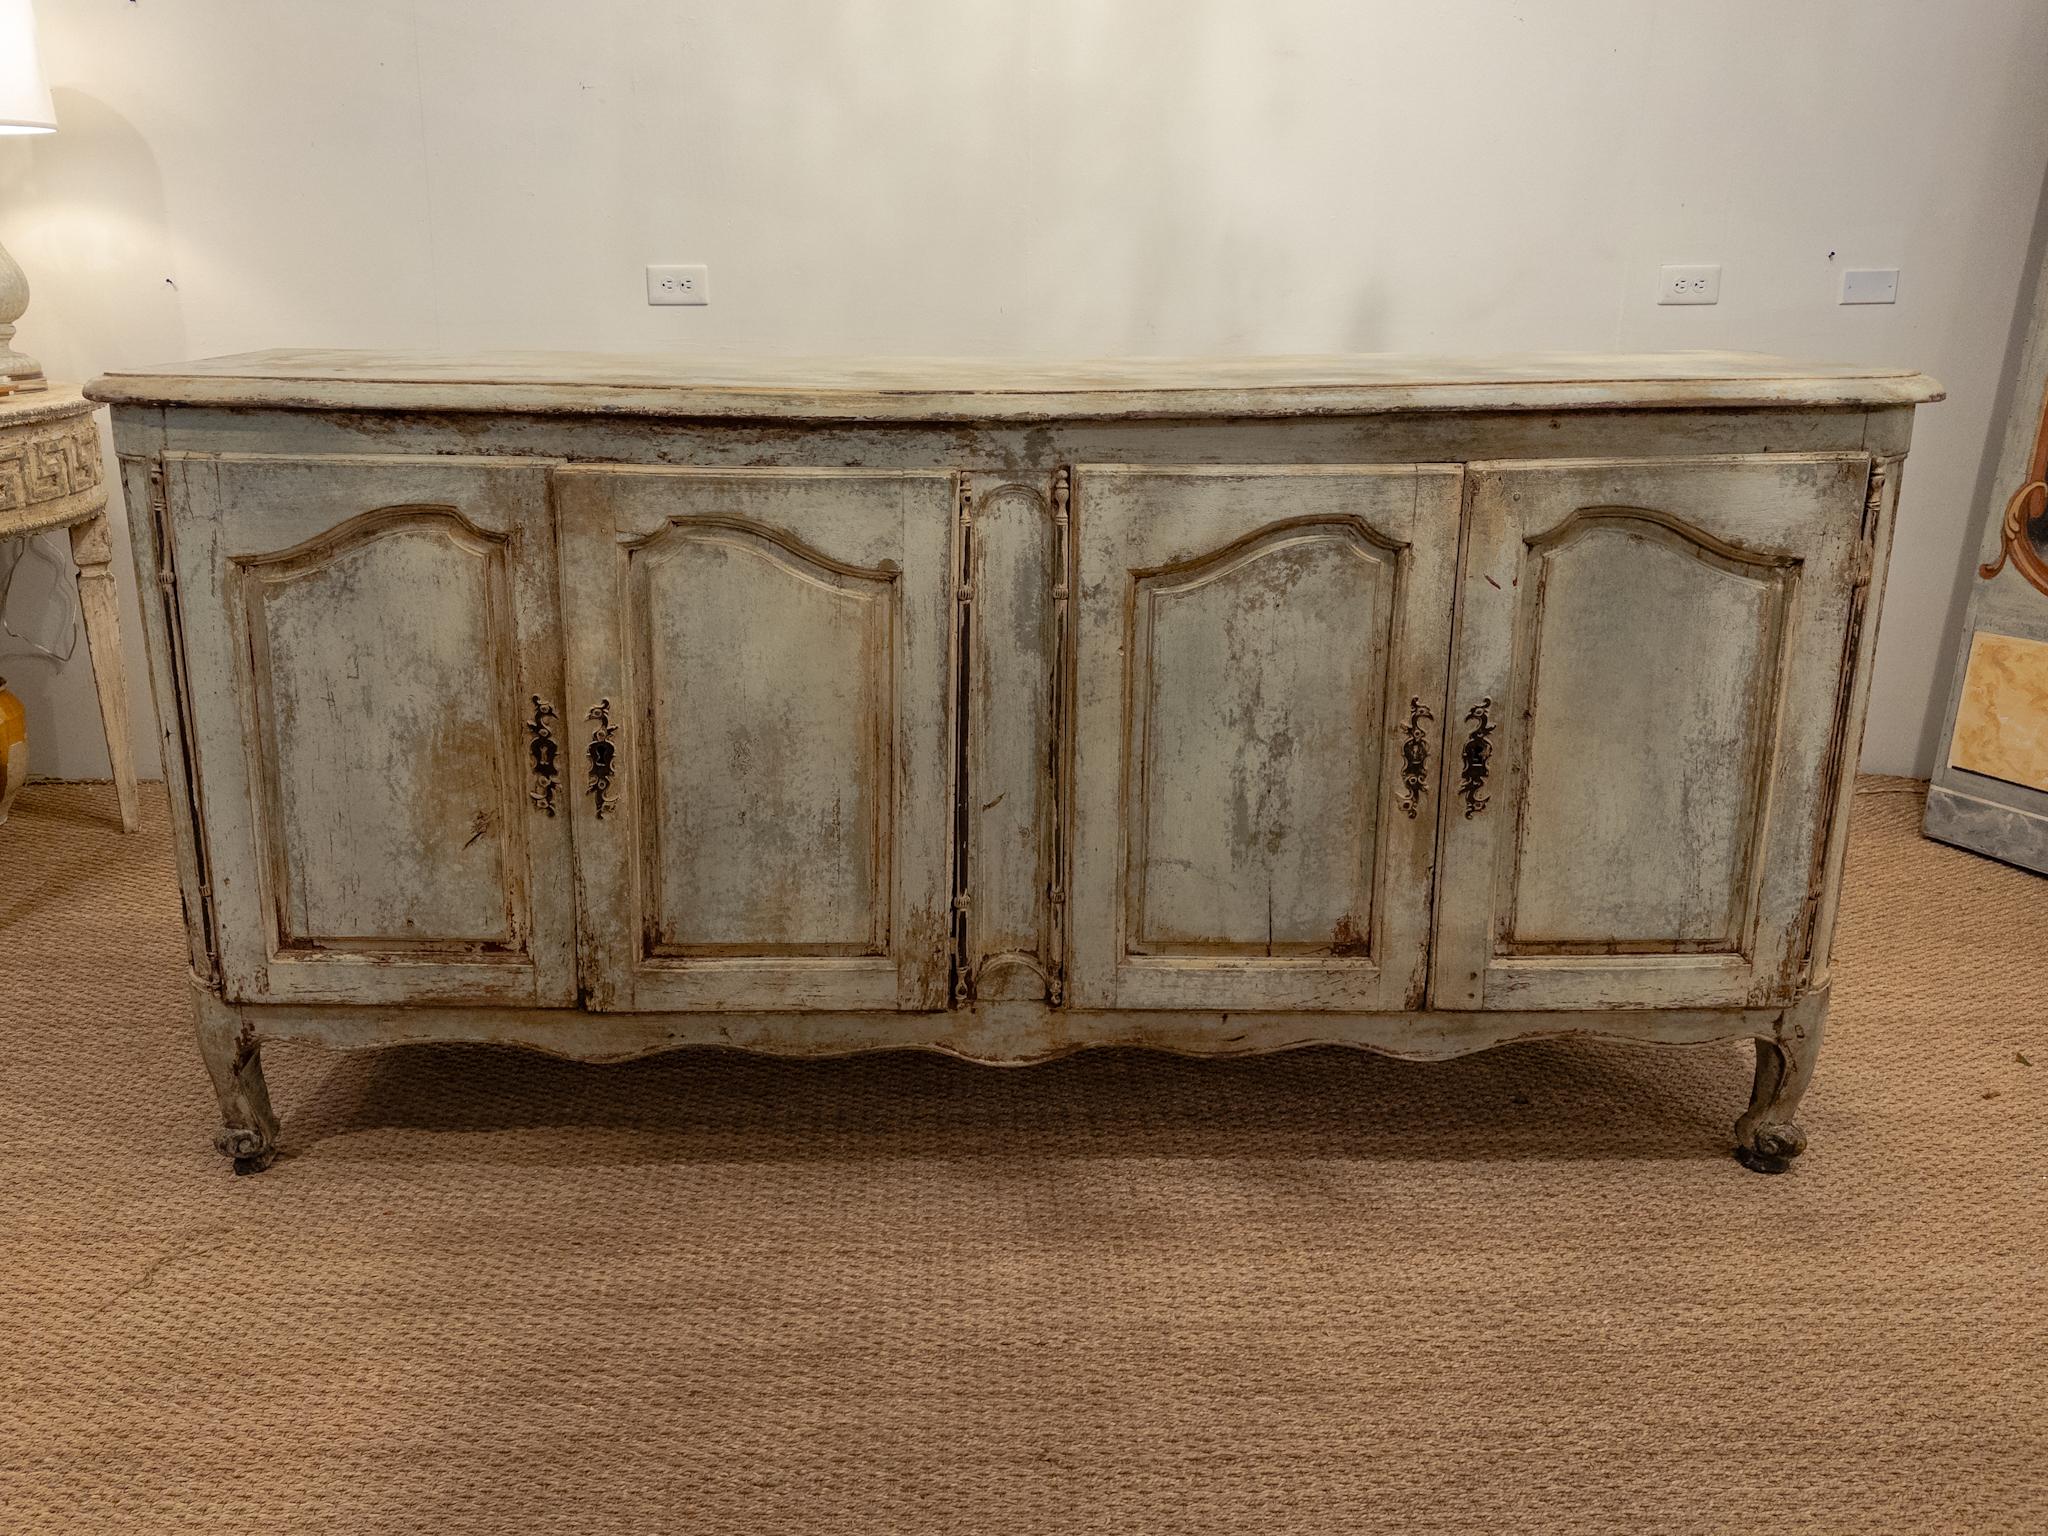 The 18th Century French four-door enfilade epitomizes the opulence and refinement of its era, showcasing exquisite craftsmanship and intricate detailing. Its original patina and hardware lend an air of authenticity, preserving the allure of bygone